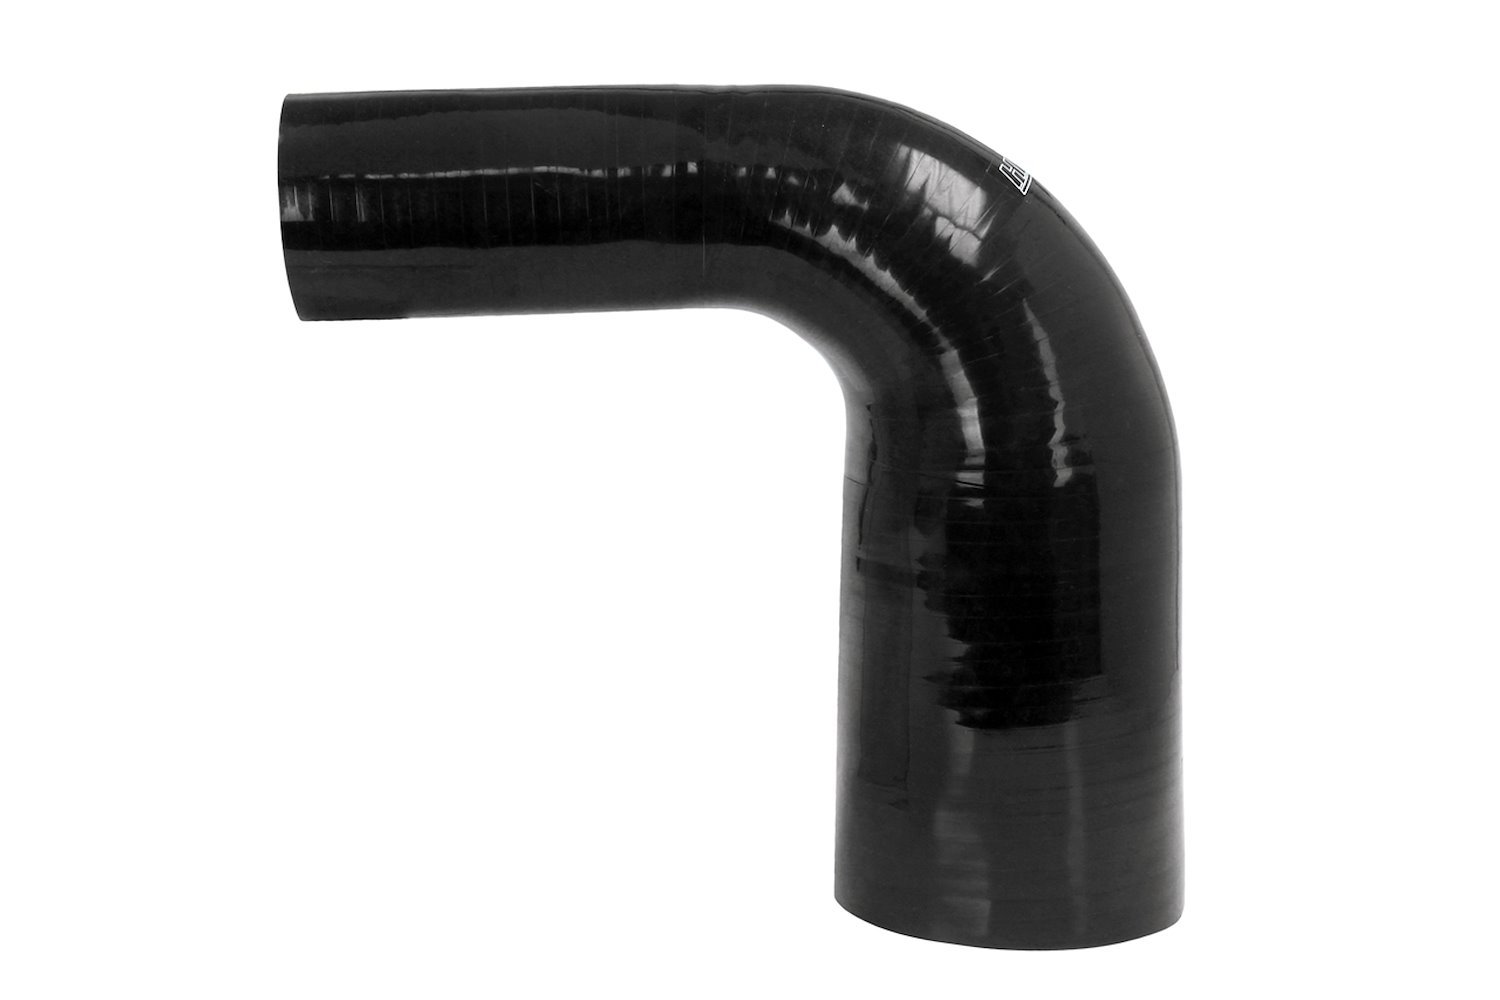 HTSER90-238-256-BLK Silicone 90-Degree Elbow Hose, High-Temp Reinforced, 2-3/8 in. - 2-9/16 in. ID, Black